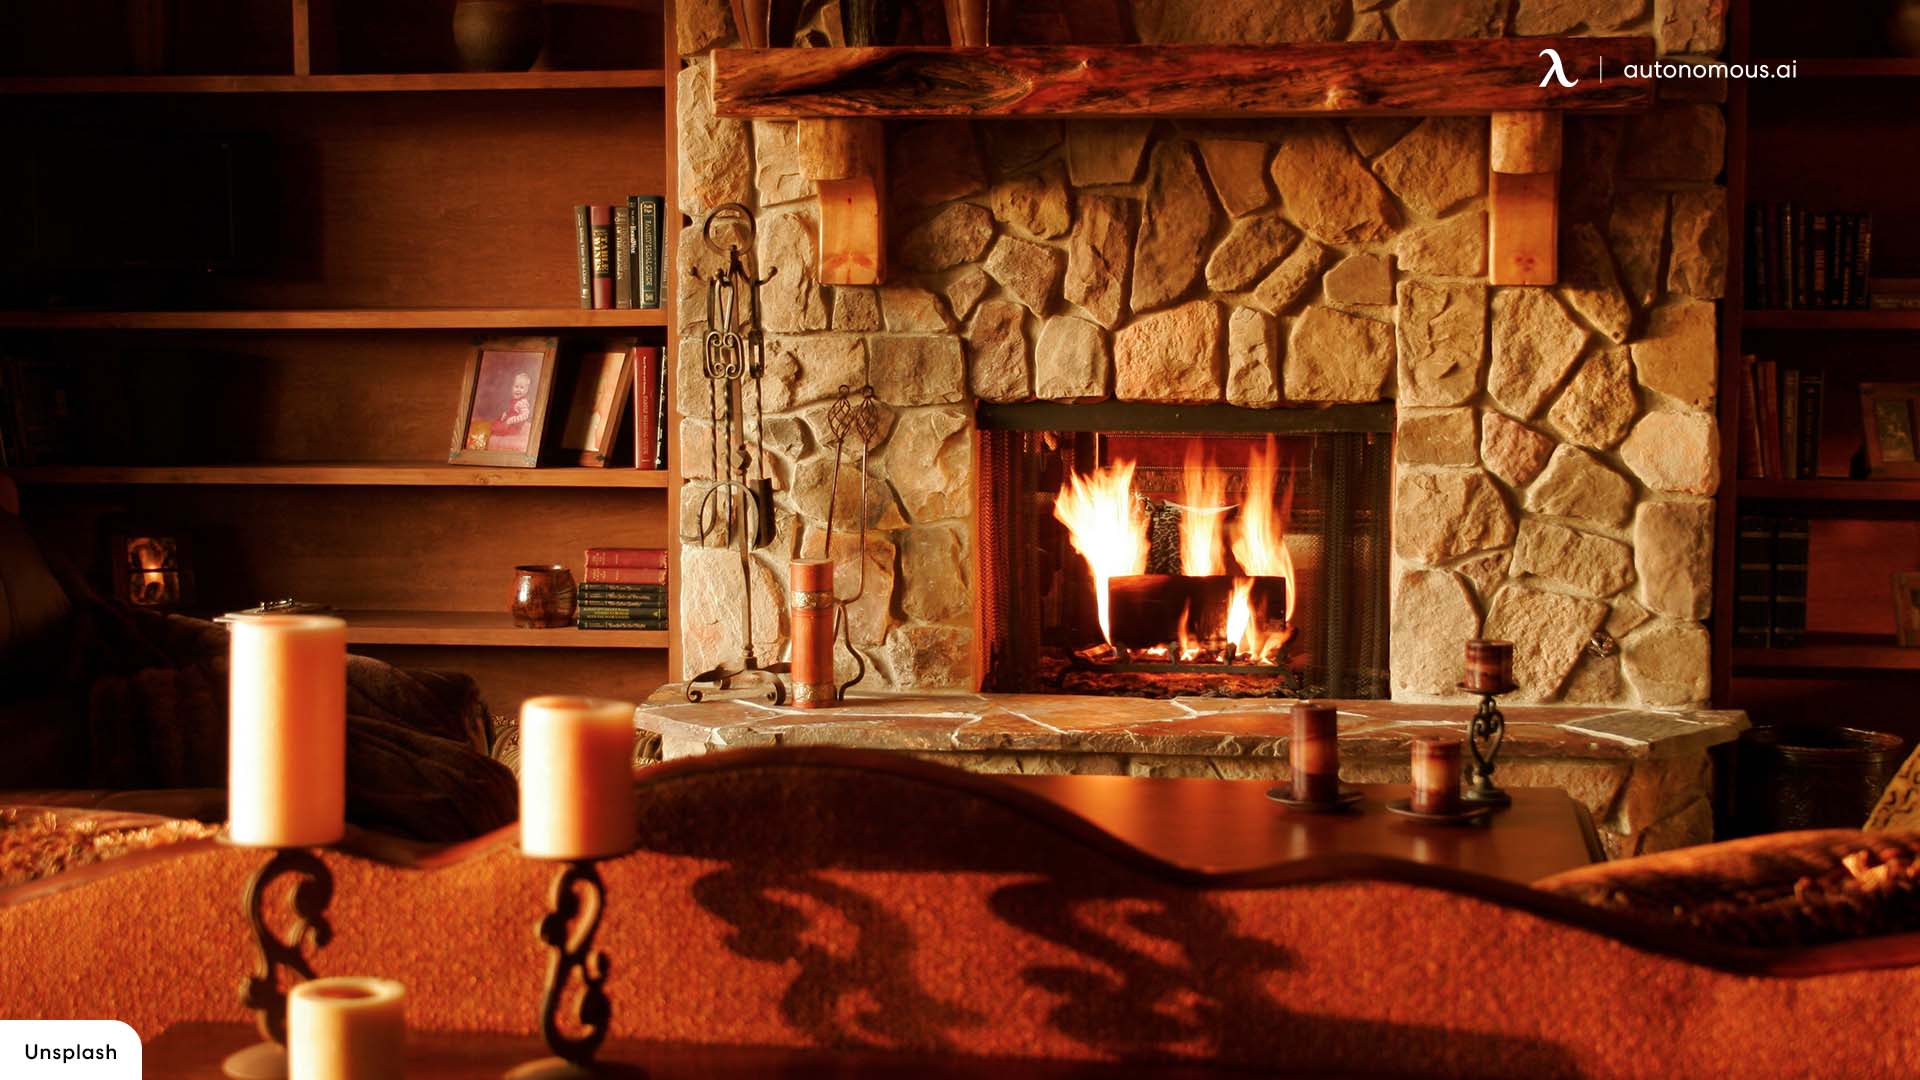 A fireplace with candles and books in the background - Cozy, warm